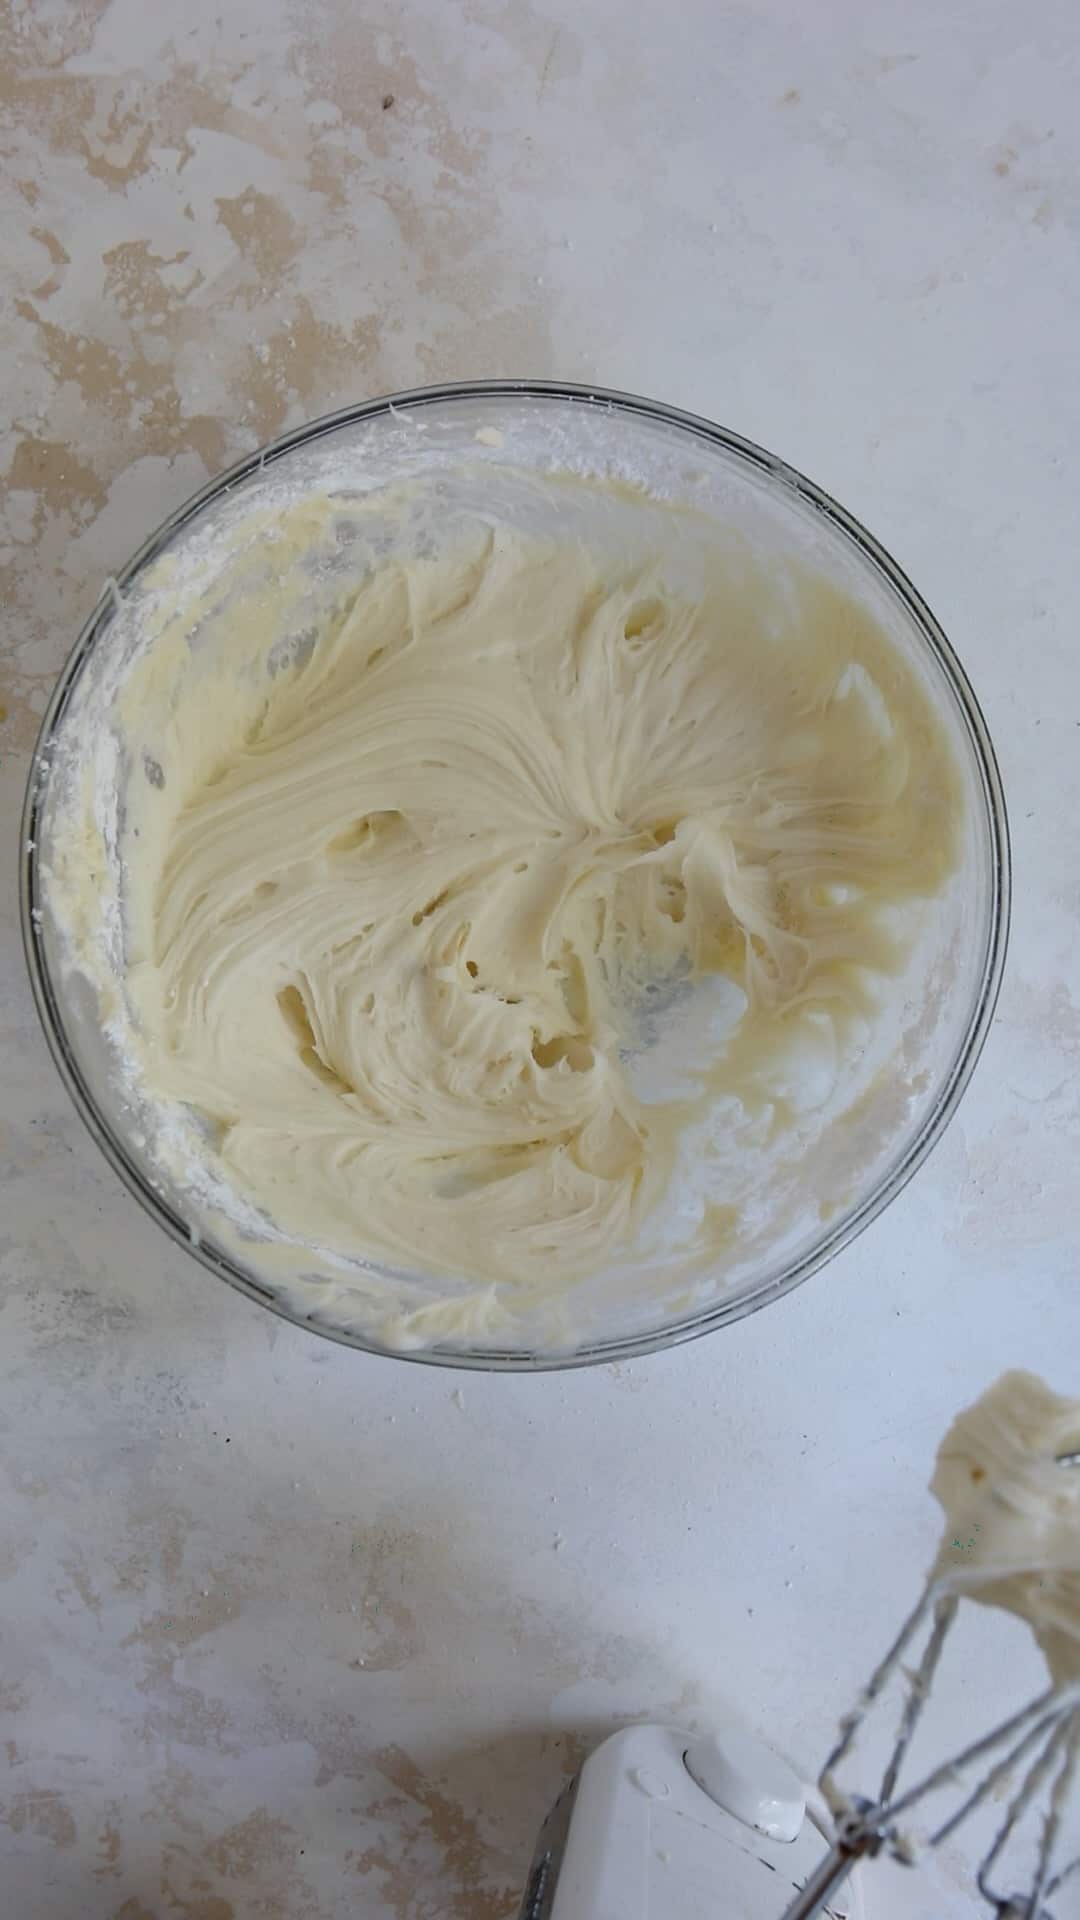 Cream cheese icing in mixing bowl with electric mixer beside it.